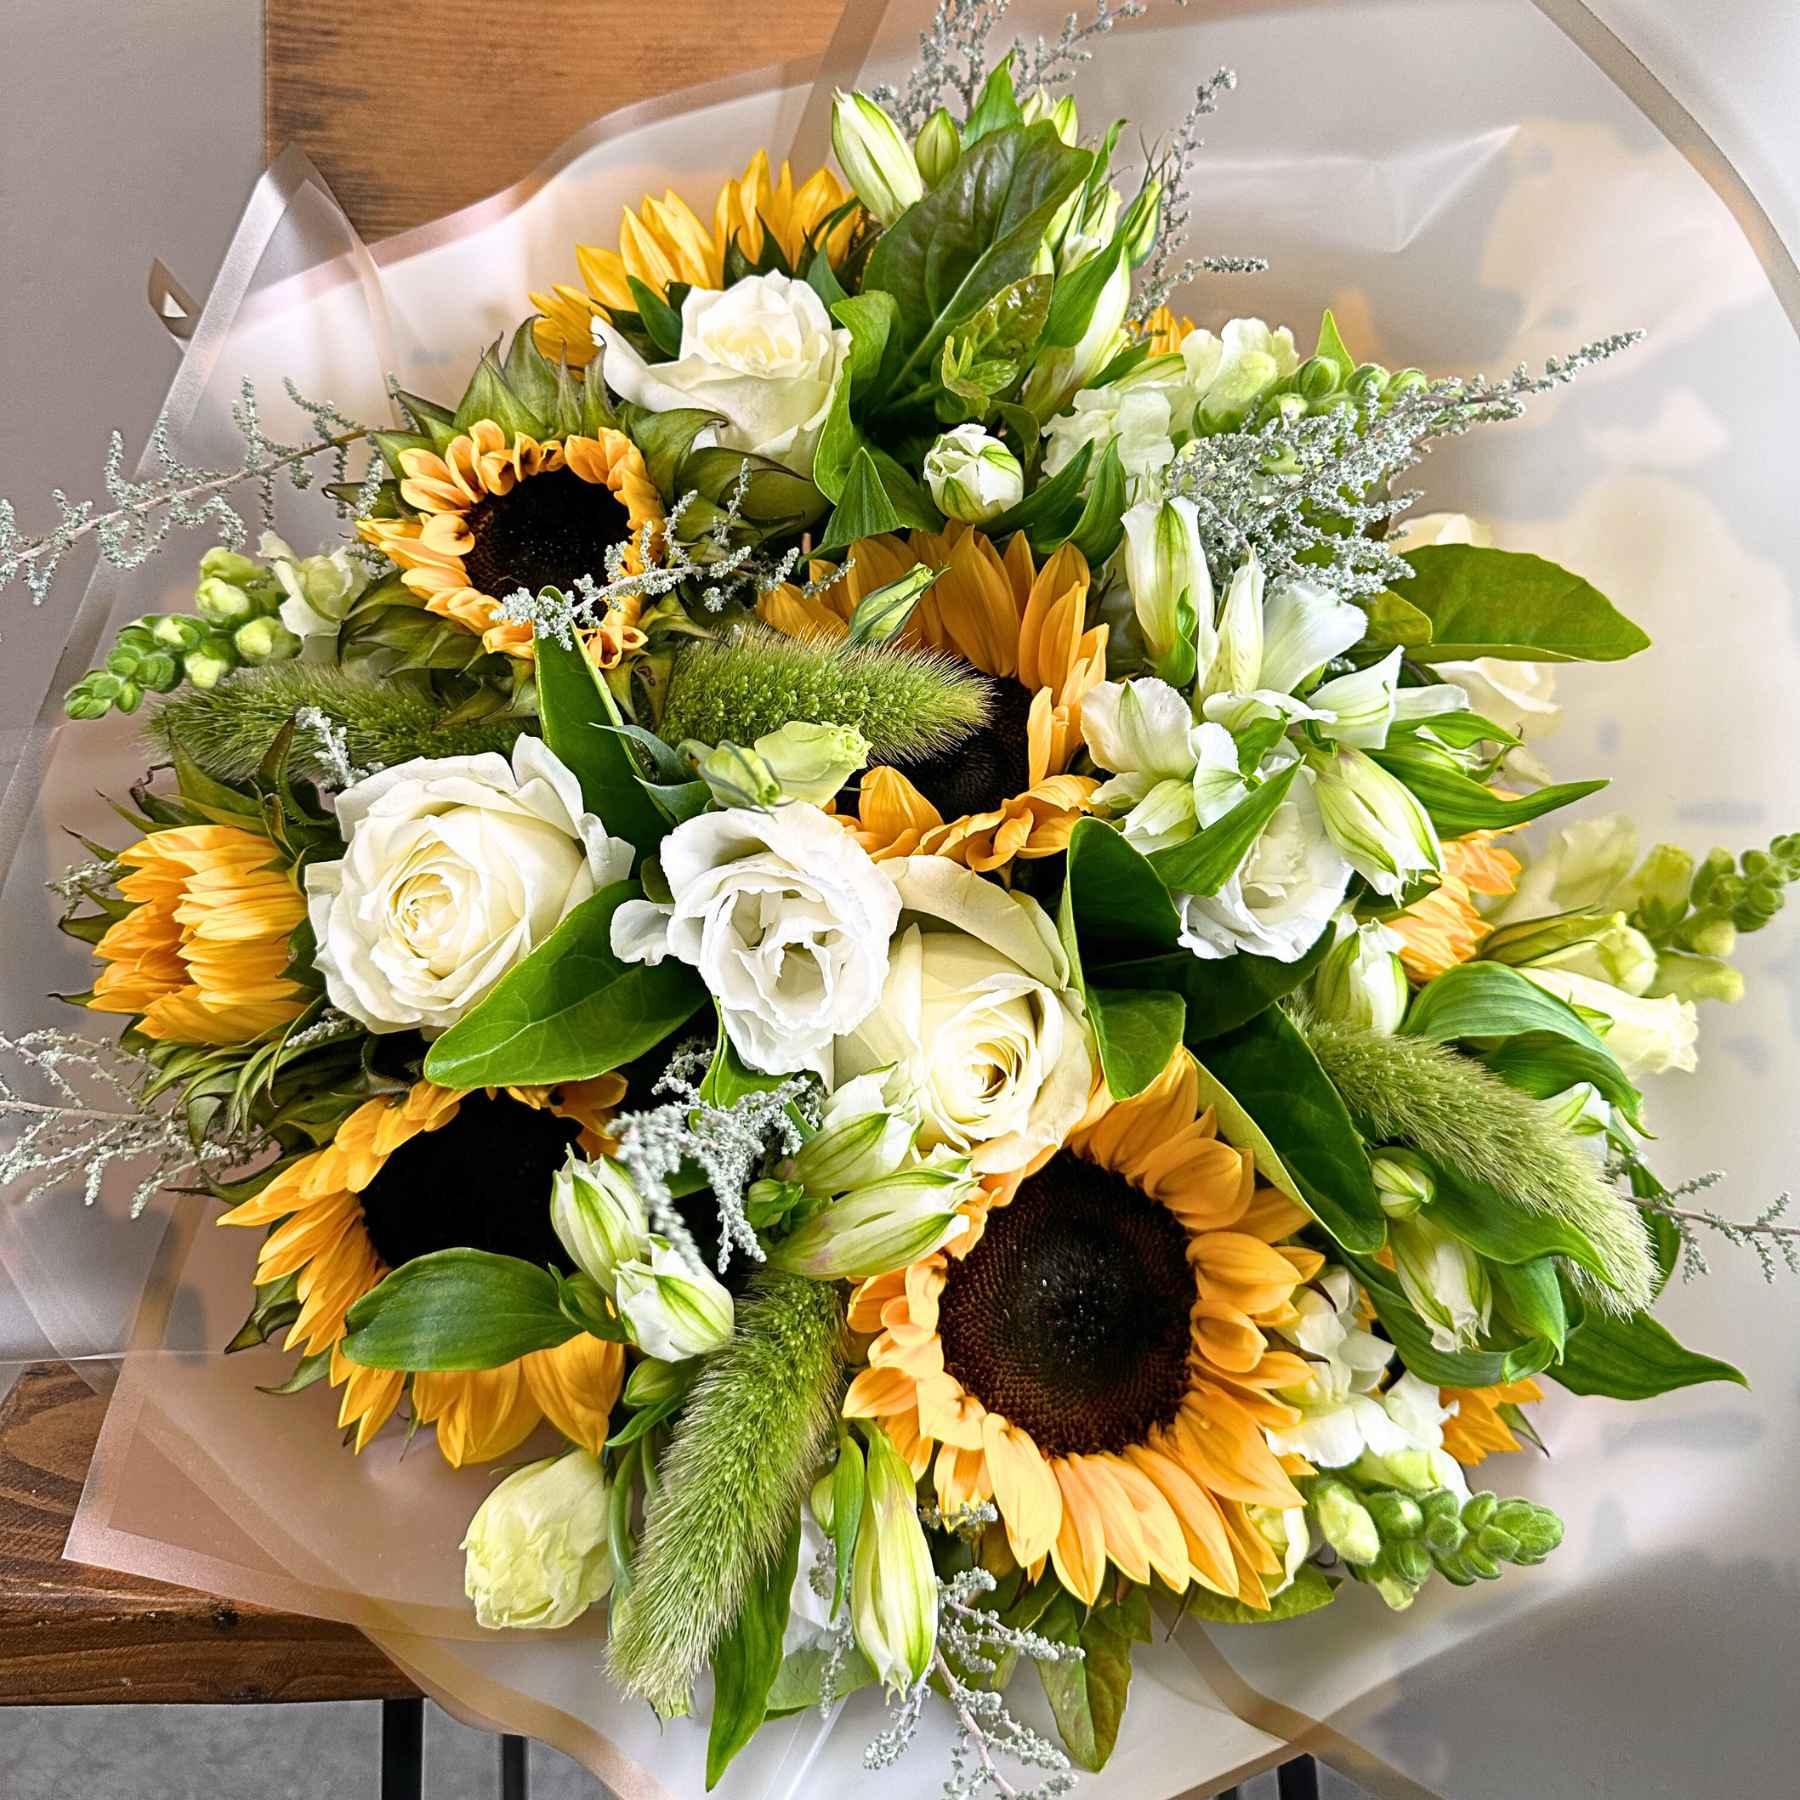 A vibrant Sunflower Garden Flower Bouquet featuring bright sunflowers, delicate white roses, and lush greenery, perfectly arranged to capture the essence of summer. This bouquet is part of the Sunflower Garden Flower Bouquet Collection by Fabulous Flowers and Gifts, designed to bring joy and beauty to any occasion.